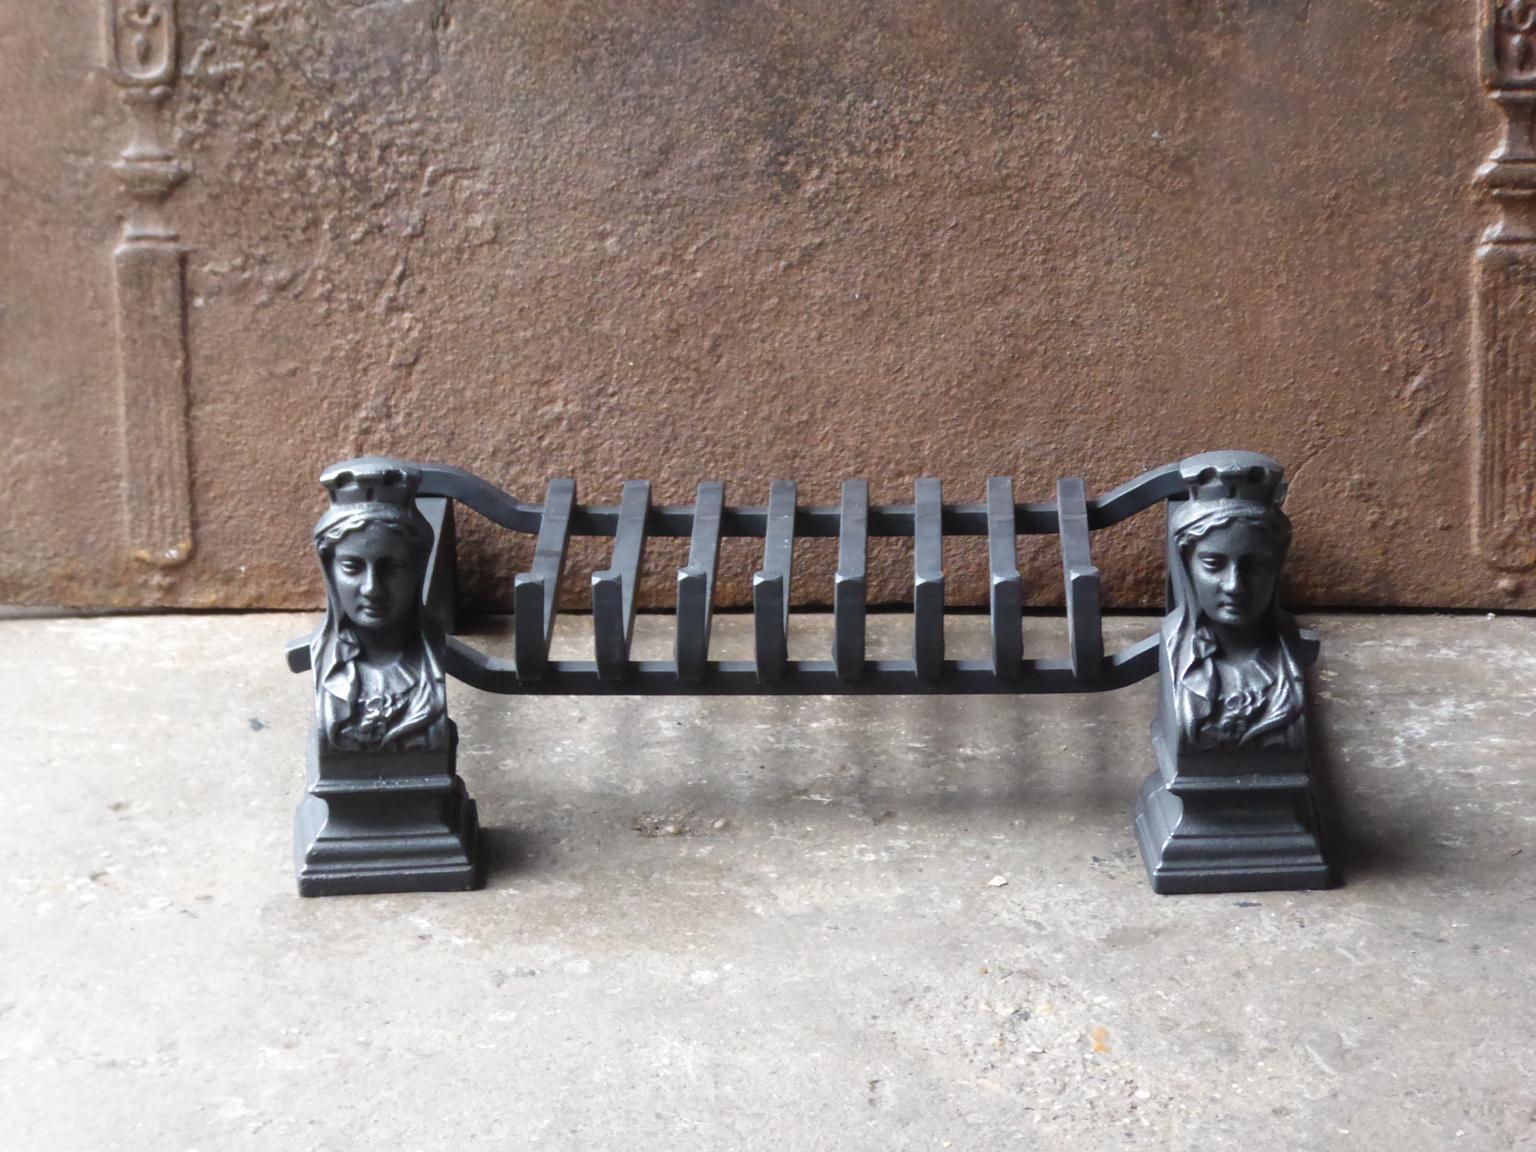 Early 20th century French Napoleon III fireplace basket - fire basket made of wrought iron and cast iron. The basket is in a good condition and is fully functional.